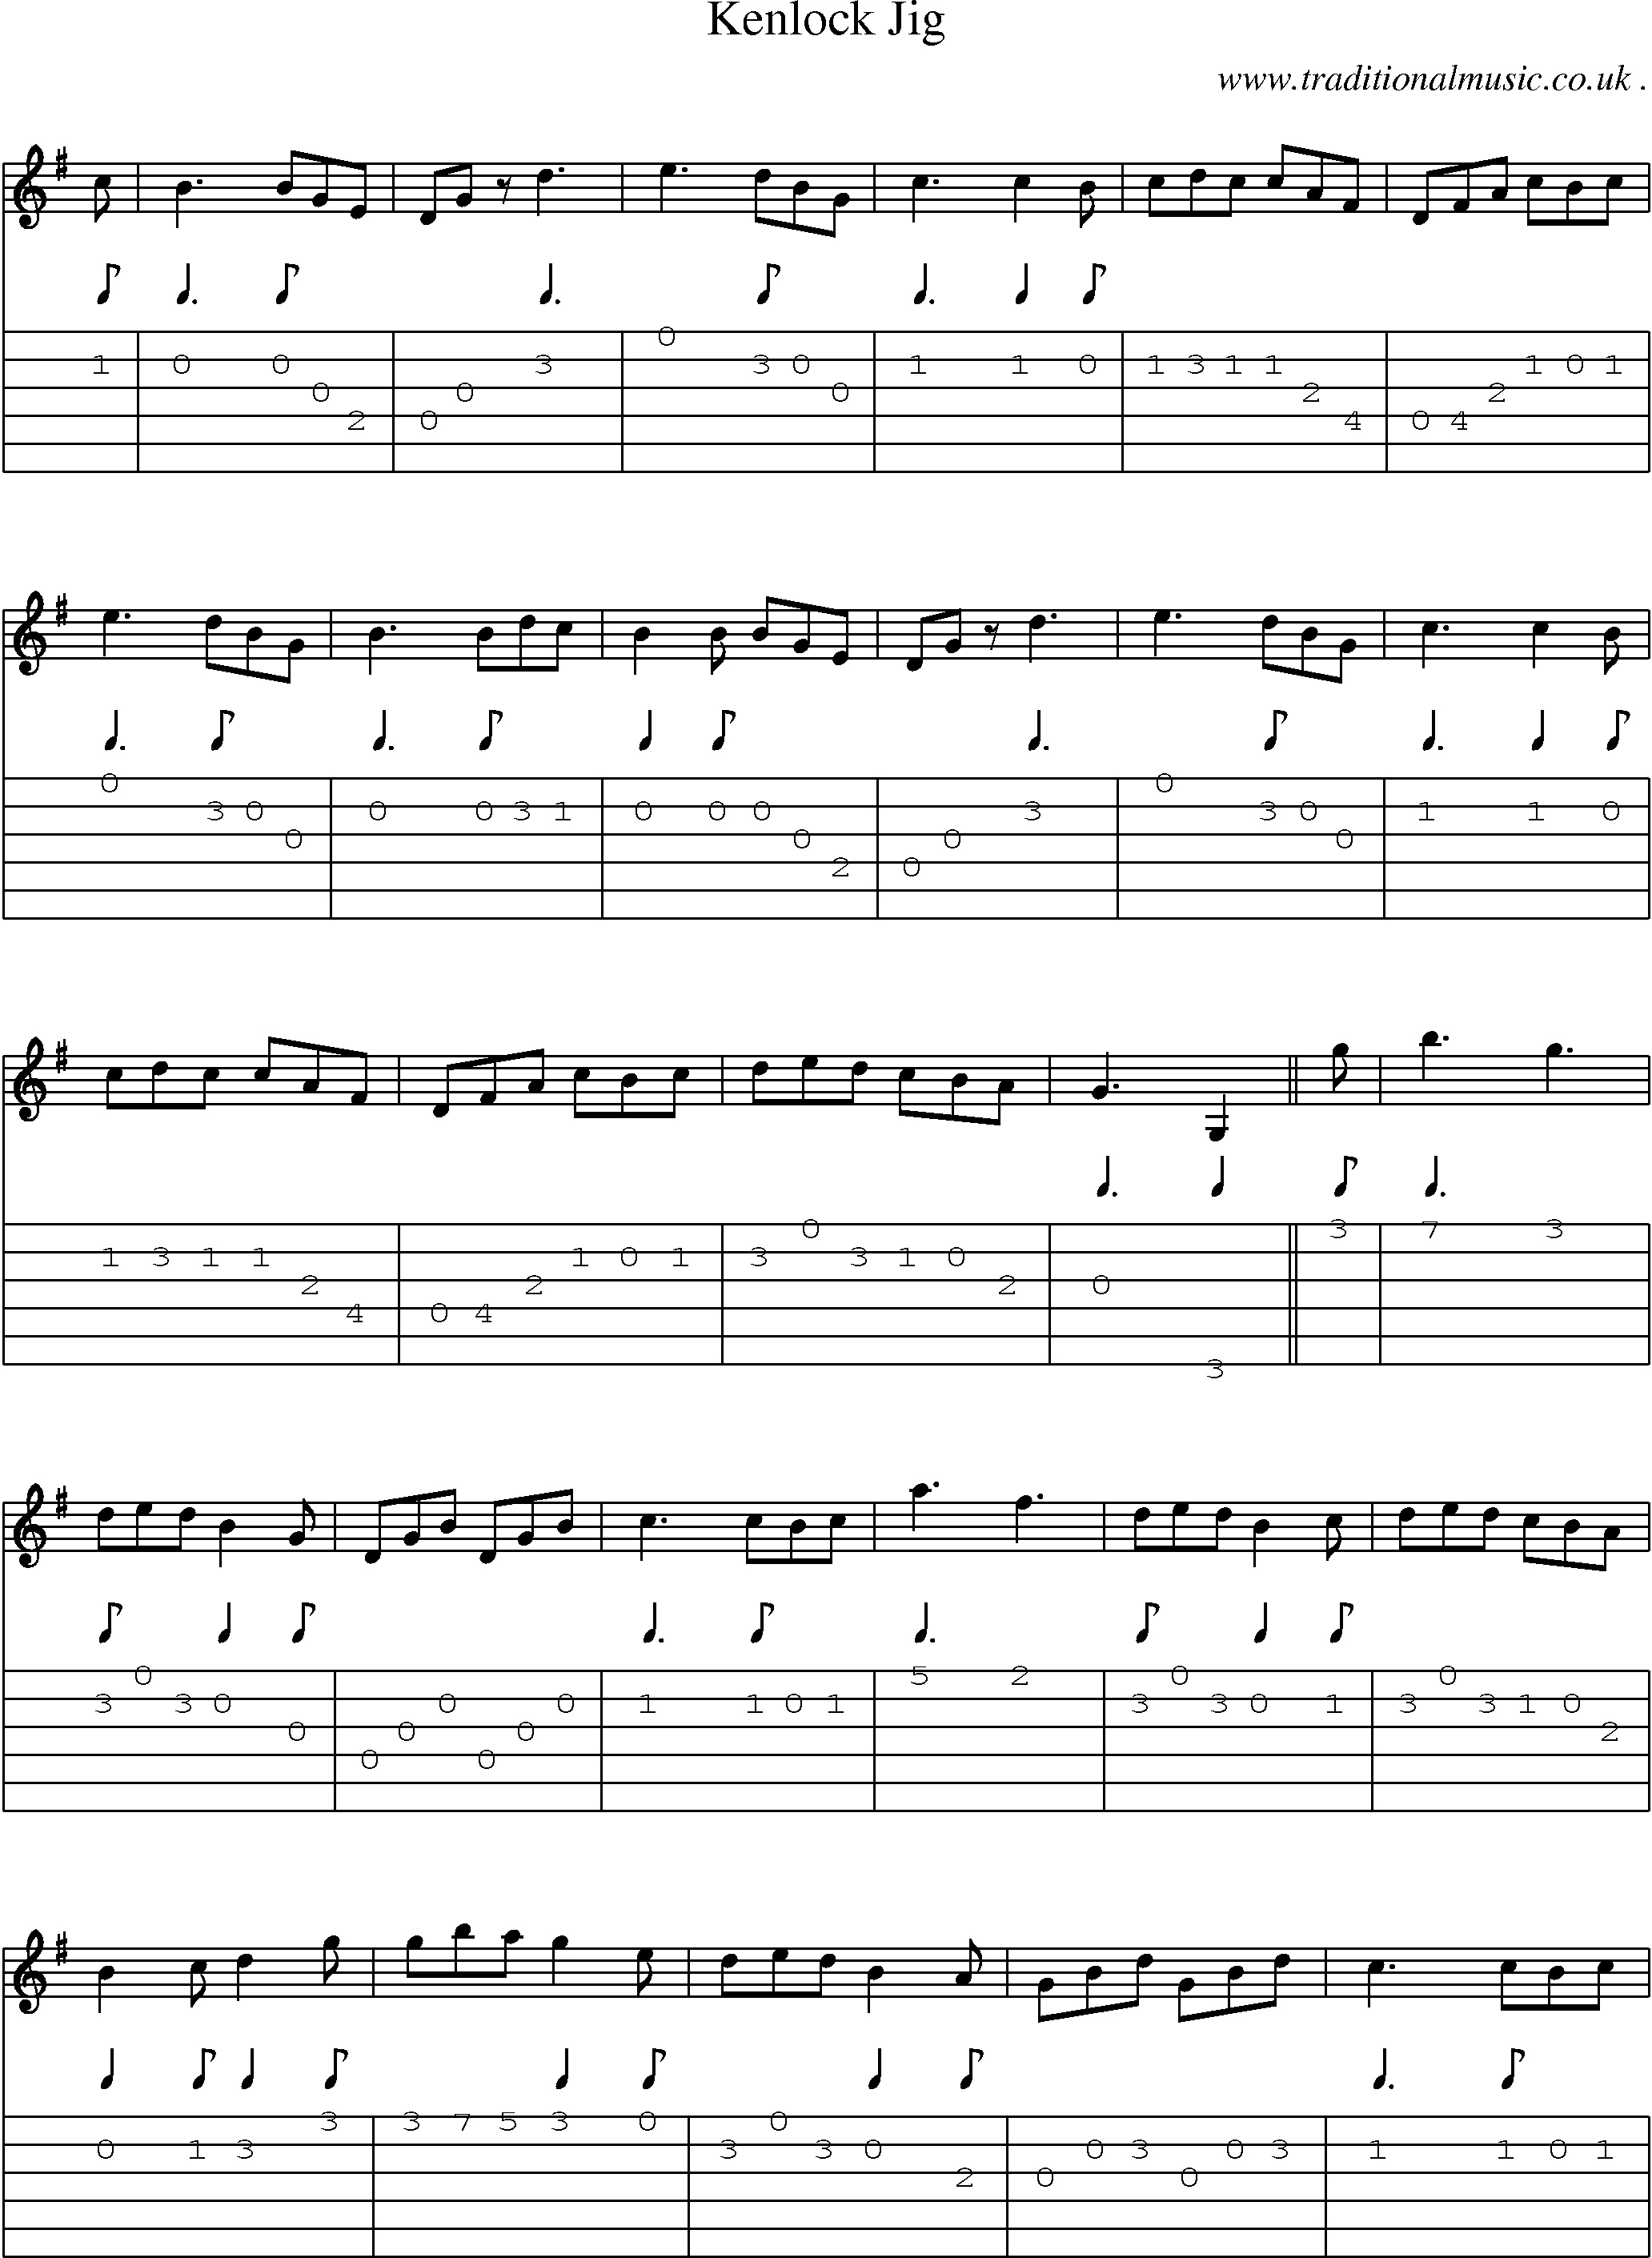 Sheet-Music and Guitar Tabs for Kenlock Jig